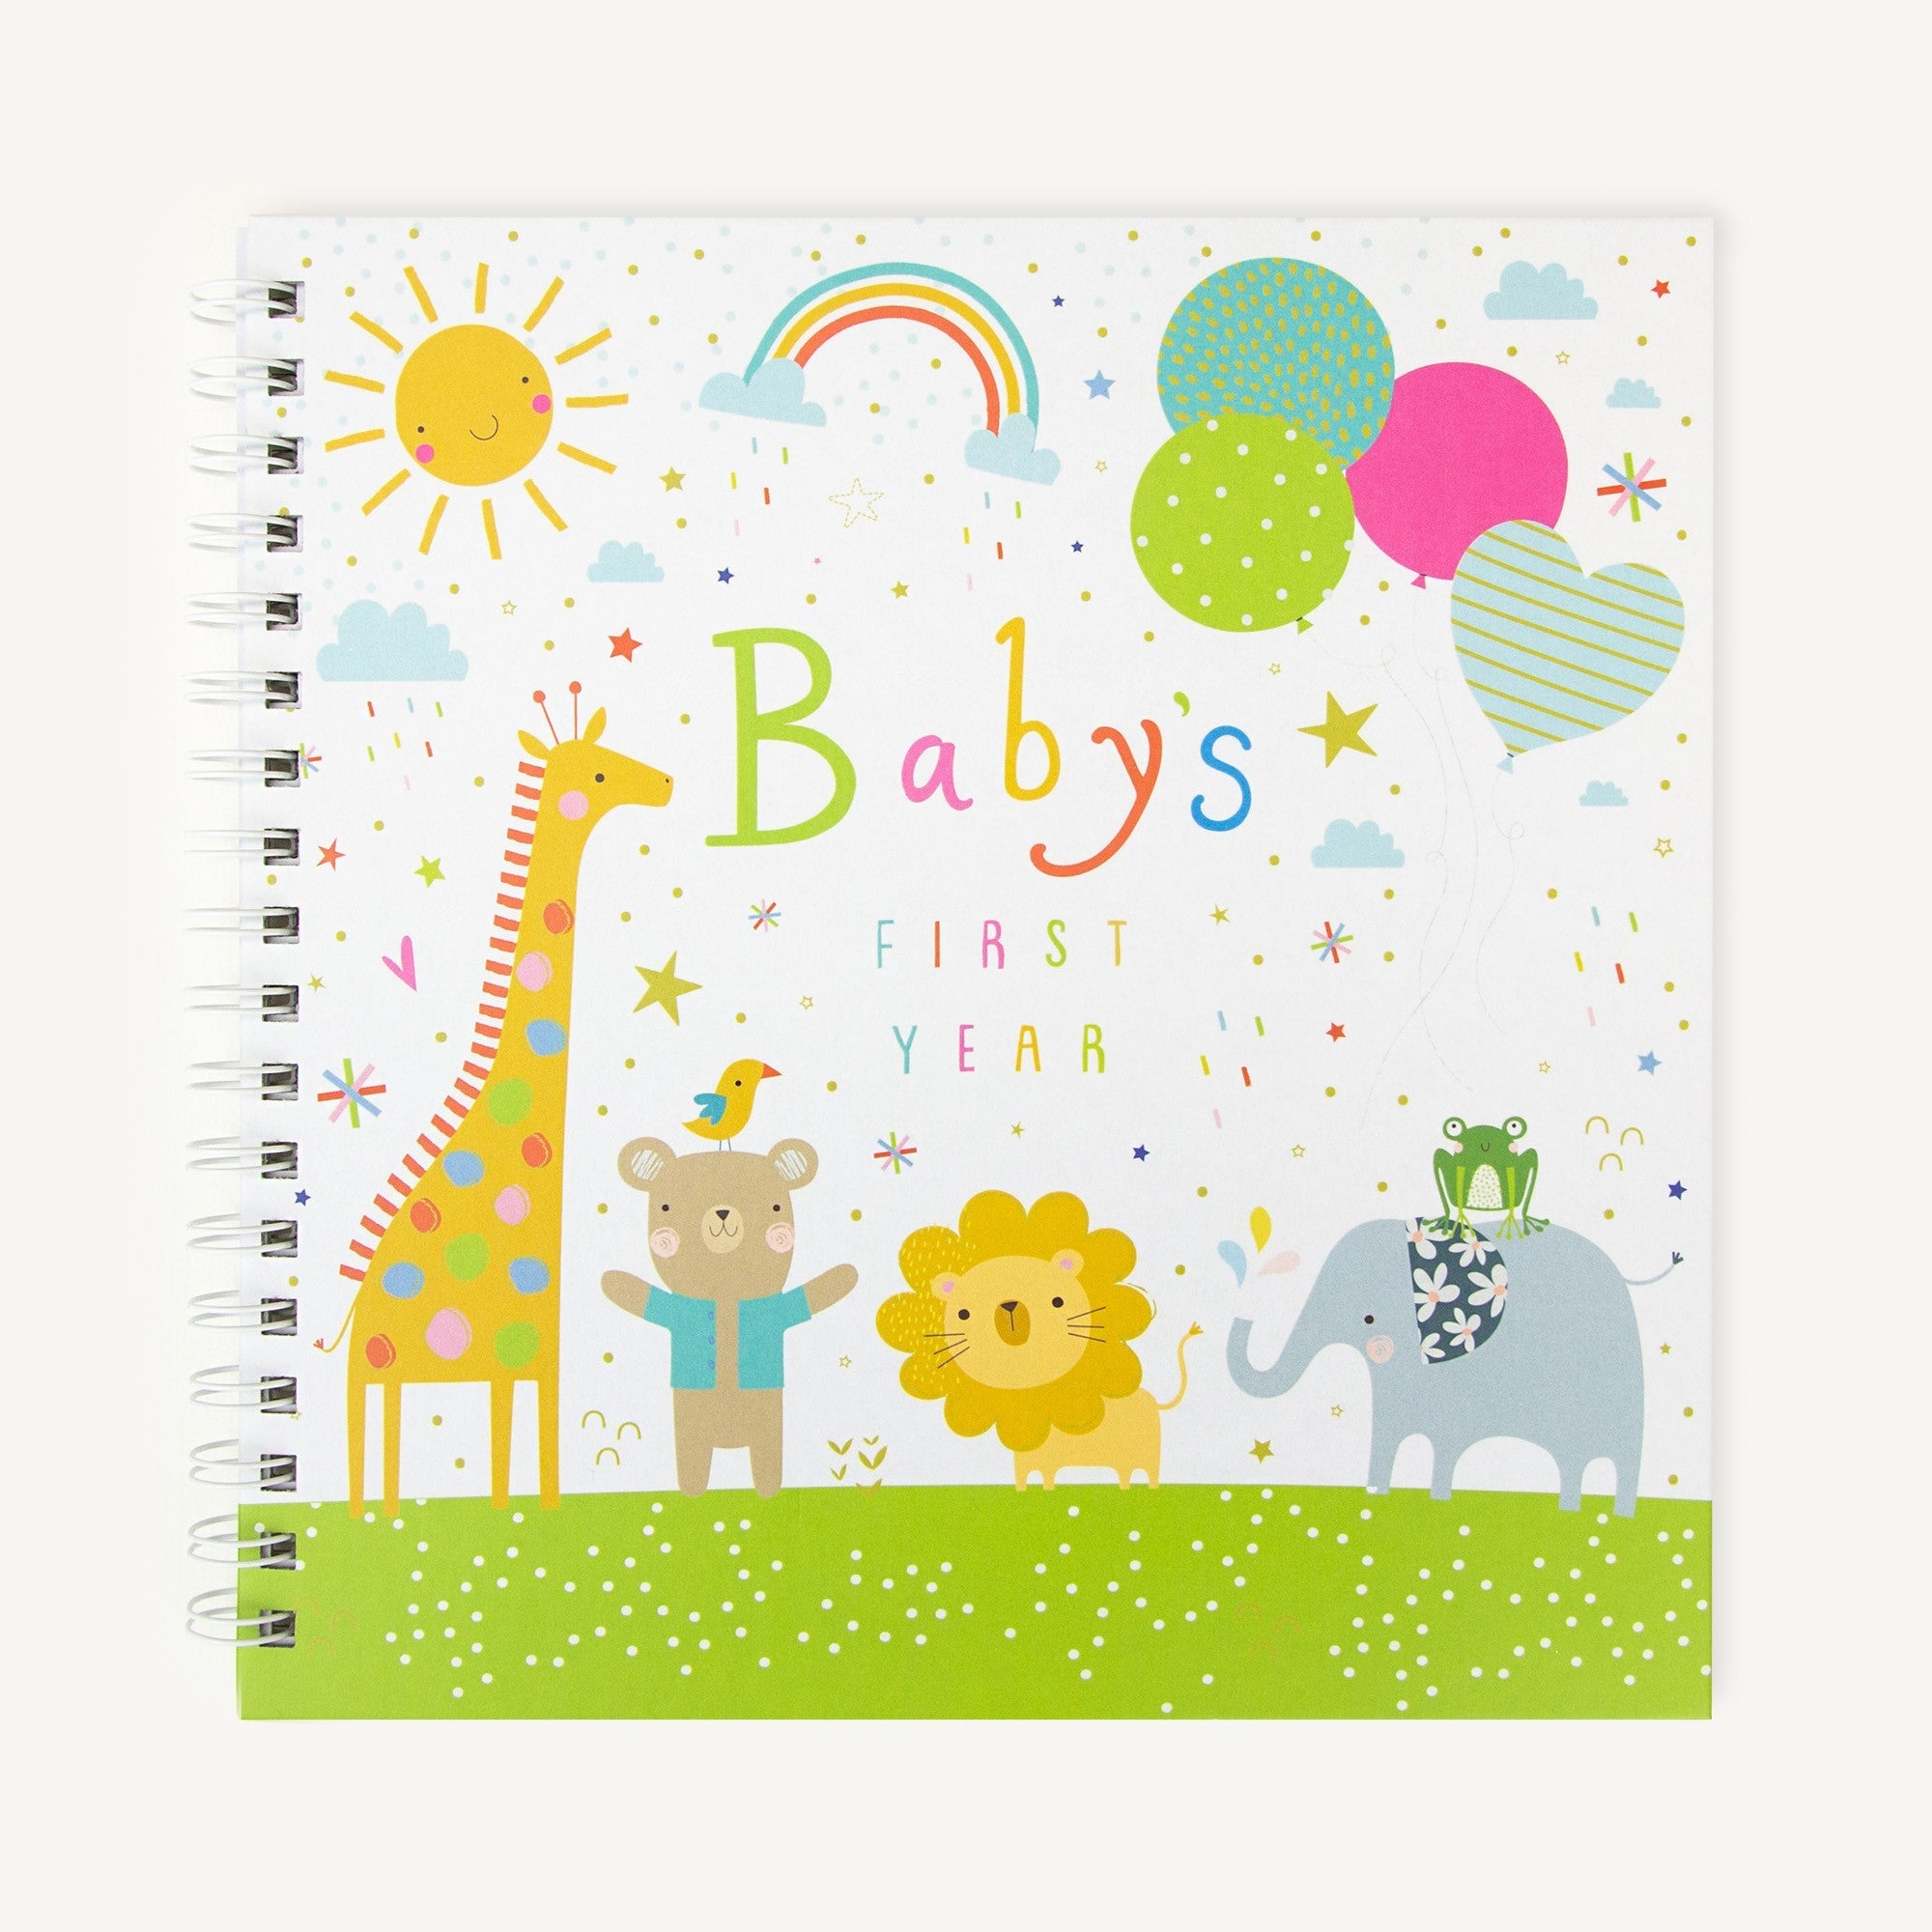 Baby’s First Year Memory Book